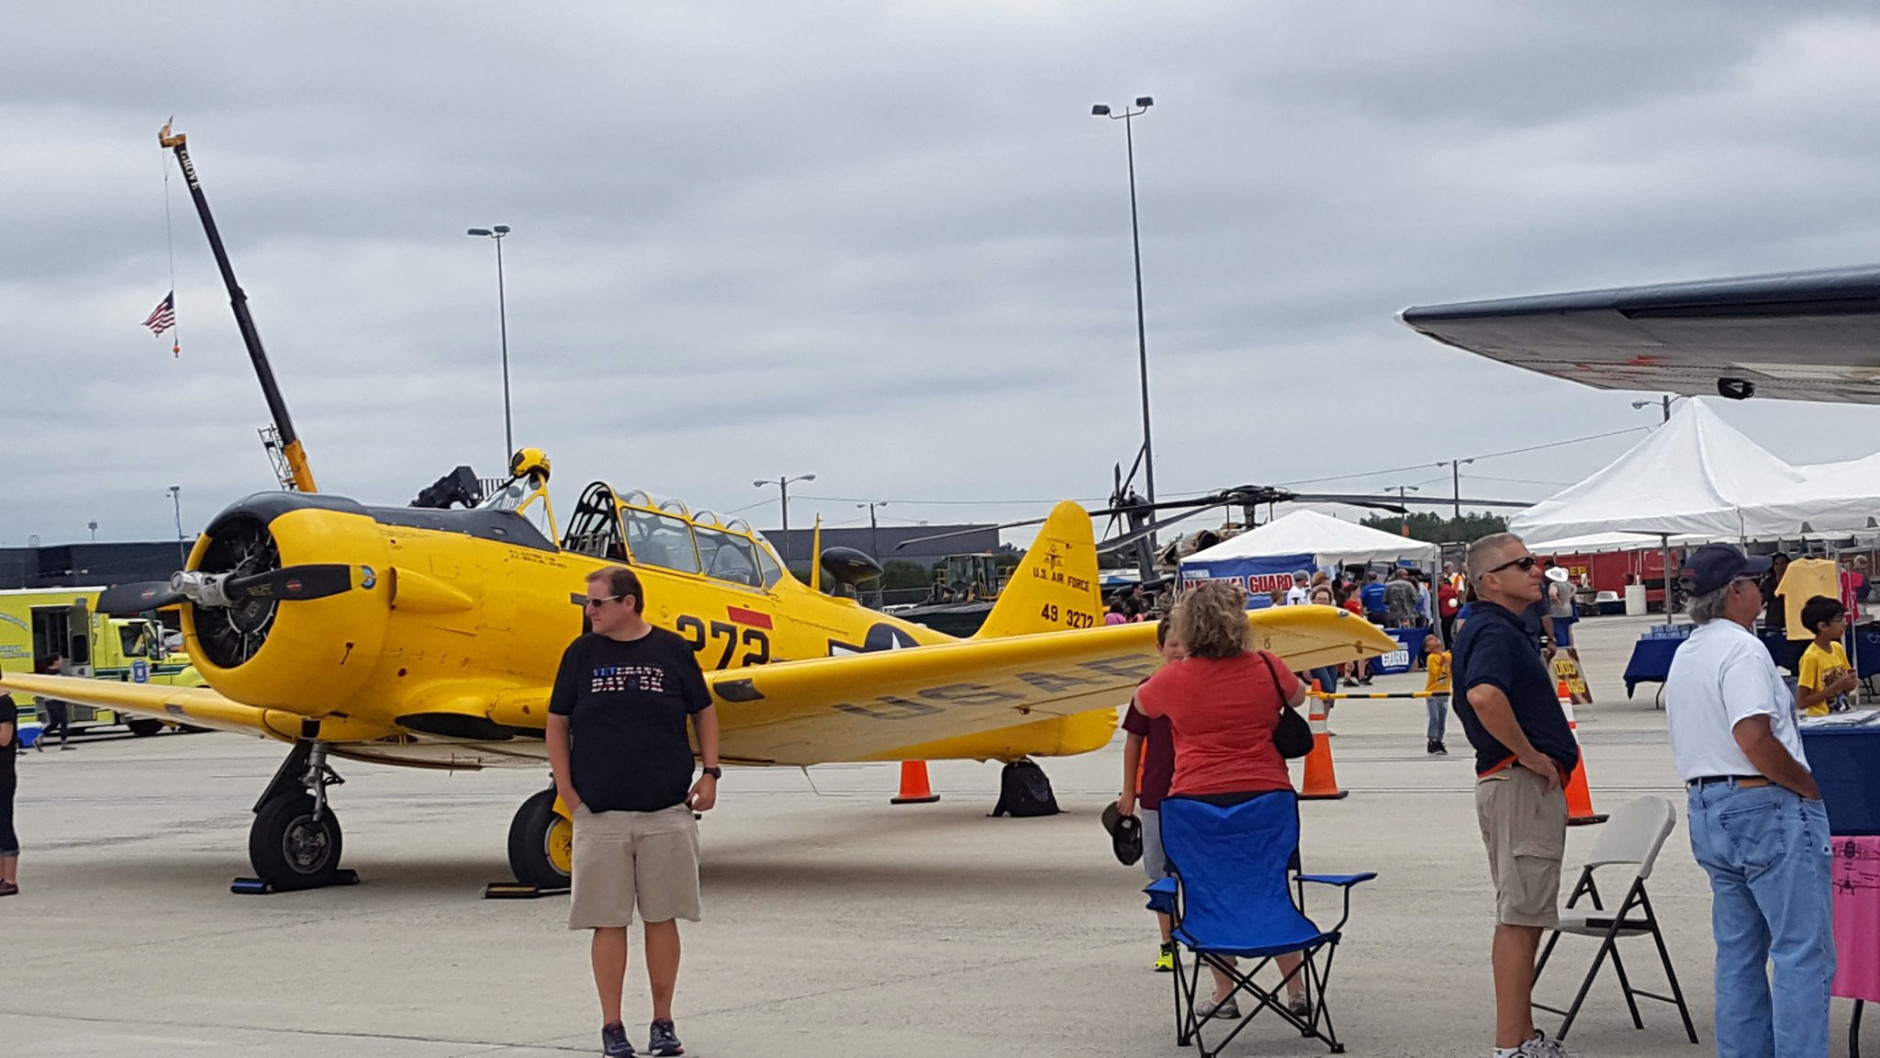 Classic planes and copters were on display during Dulles Day and Plane Pull at Washington Dulles International Airport, a charity event for Special Olympics Virginia. (WTOP/Ralph Fox)